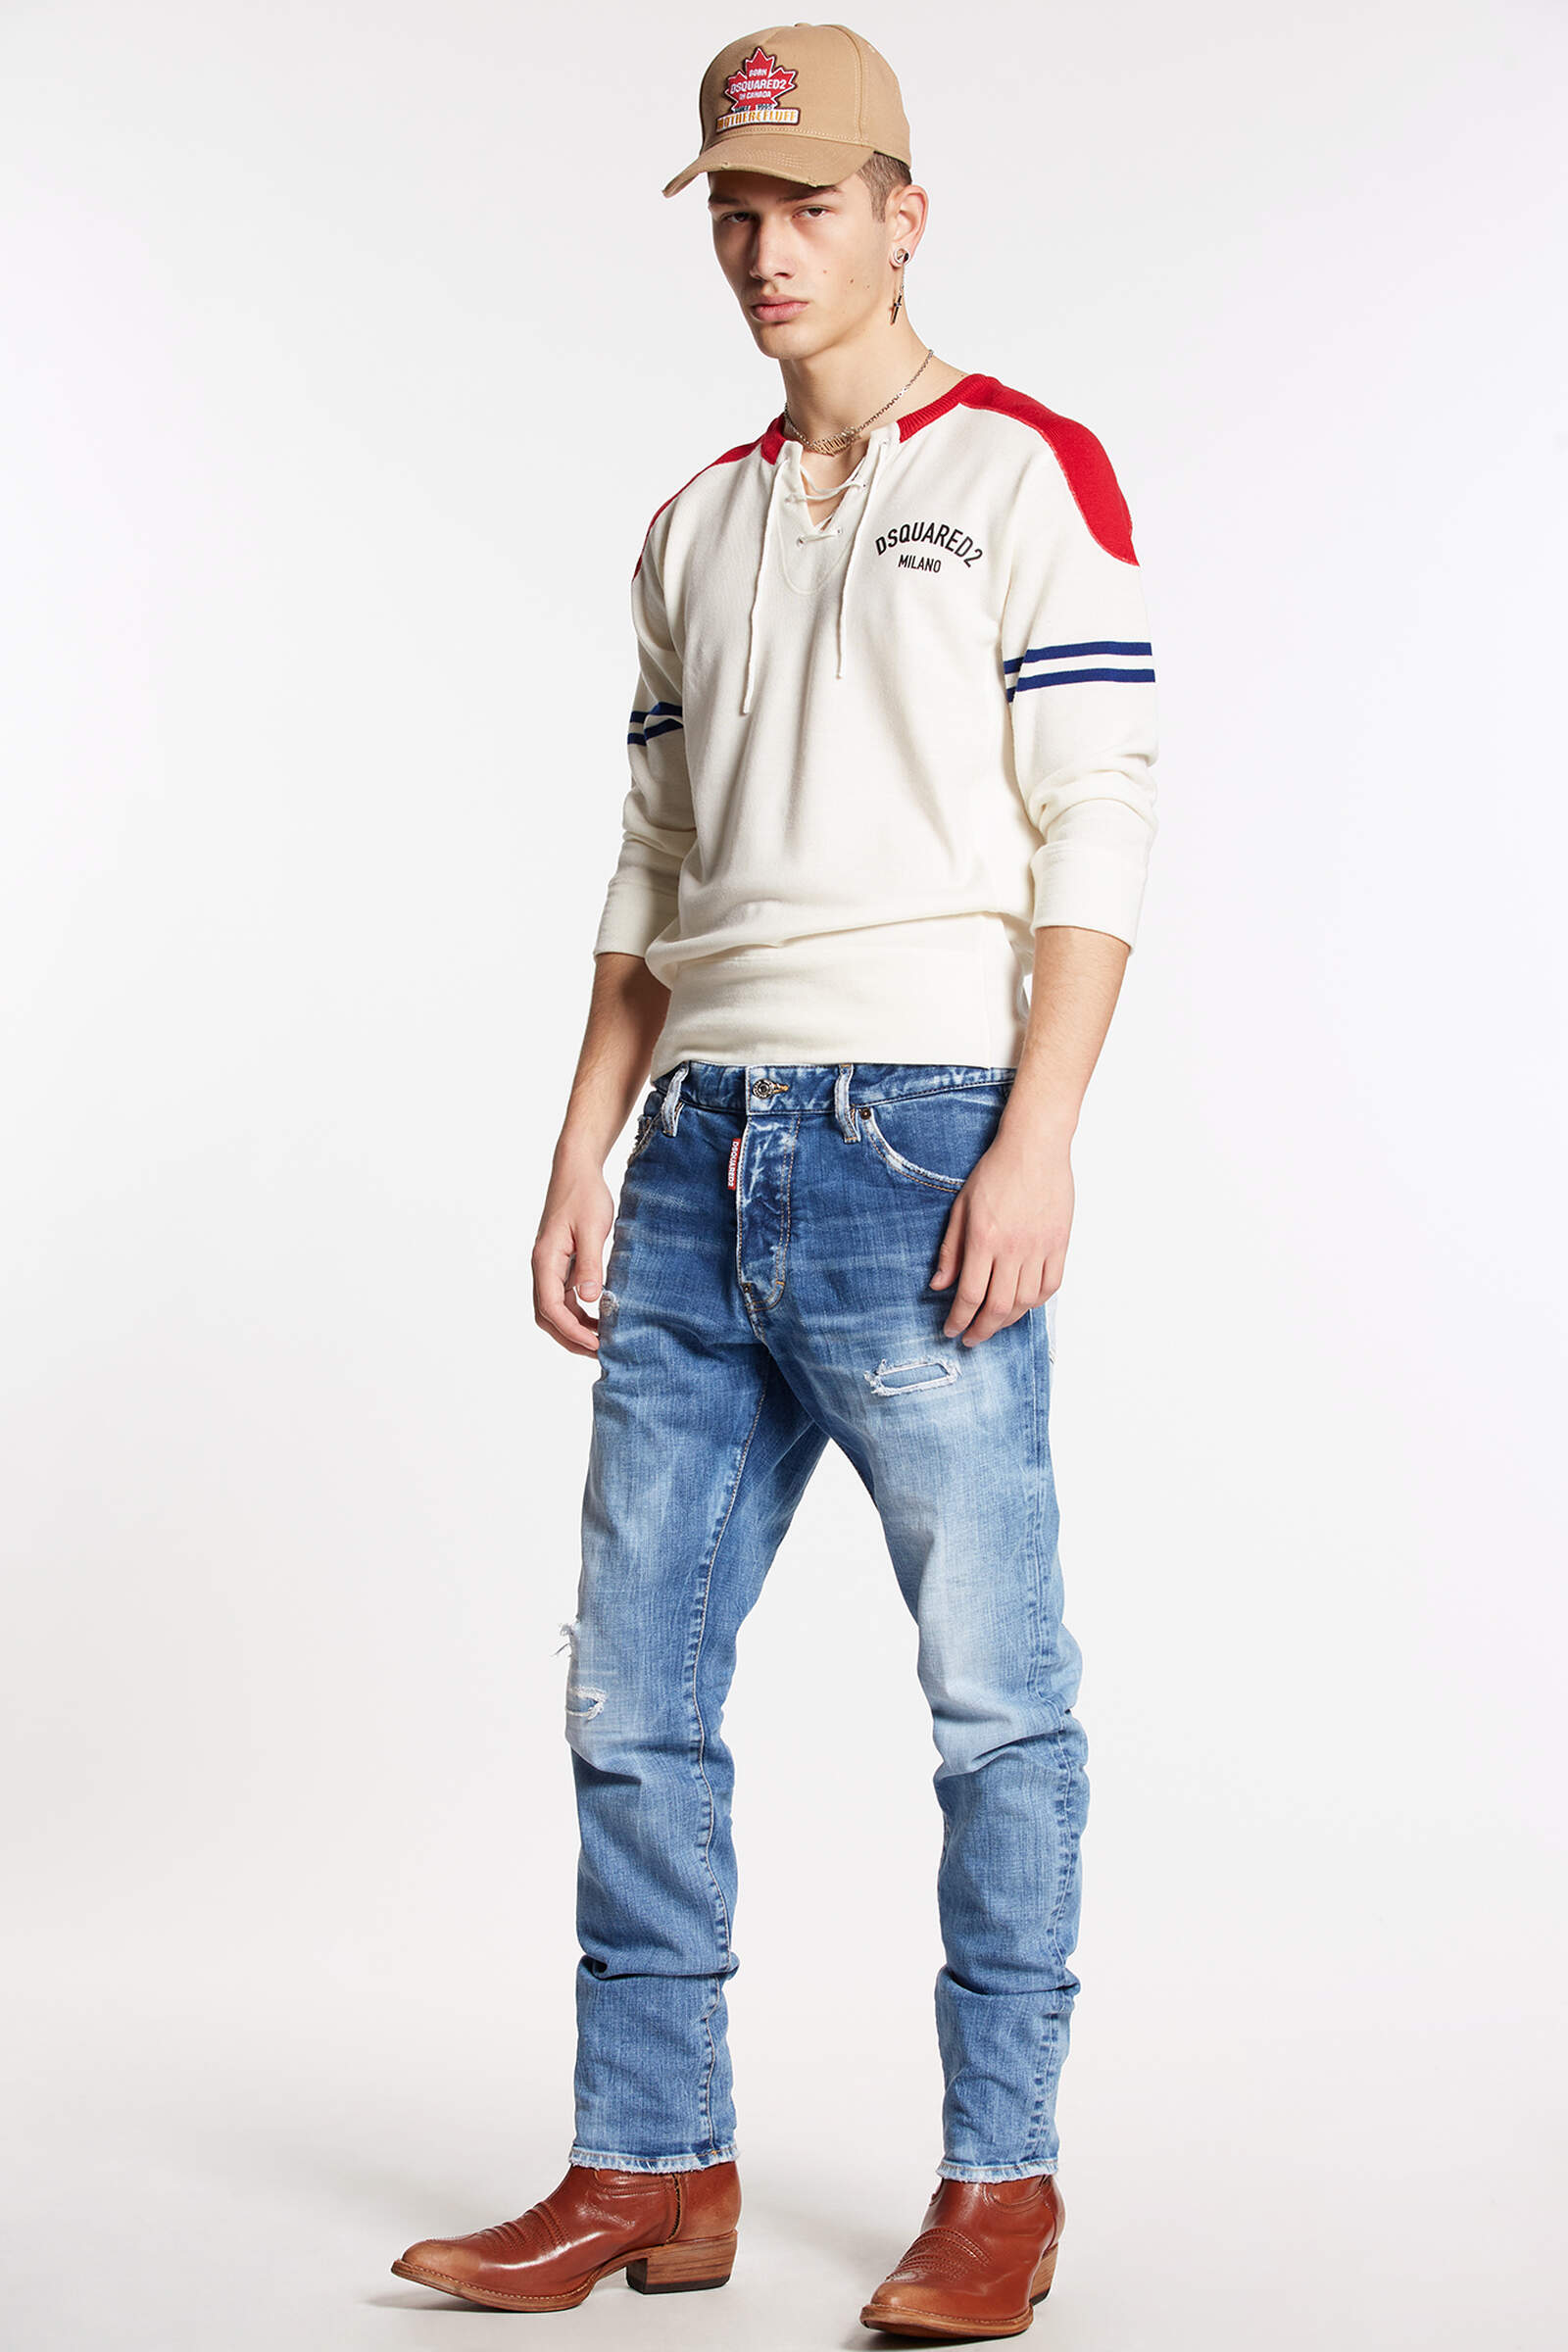 DSQUARED2 Cool Guy Jeans in Light Blue Washing 52